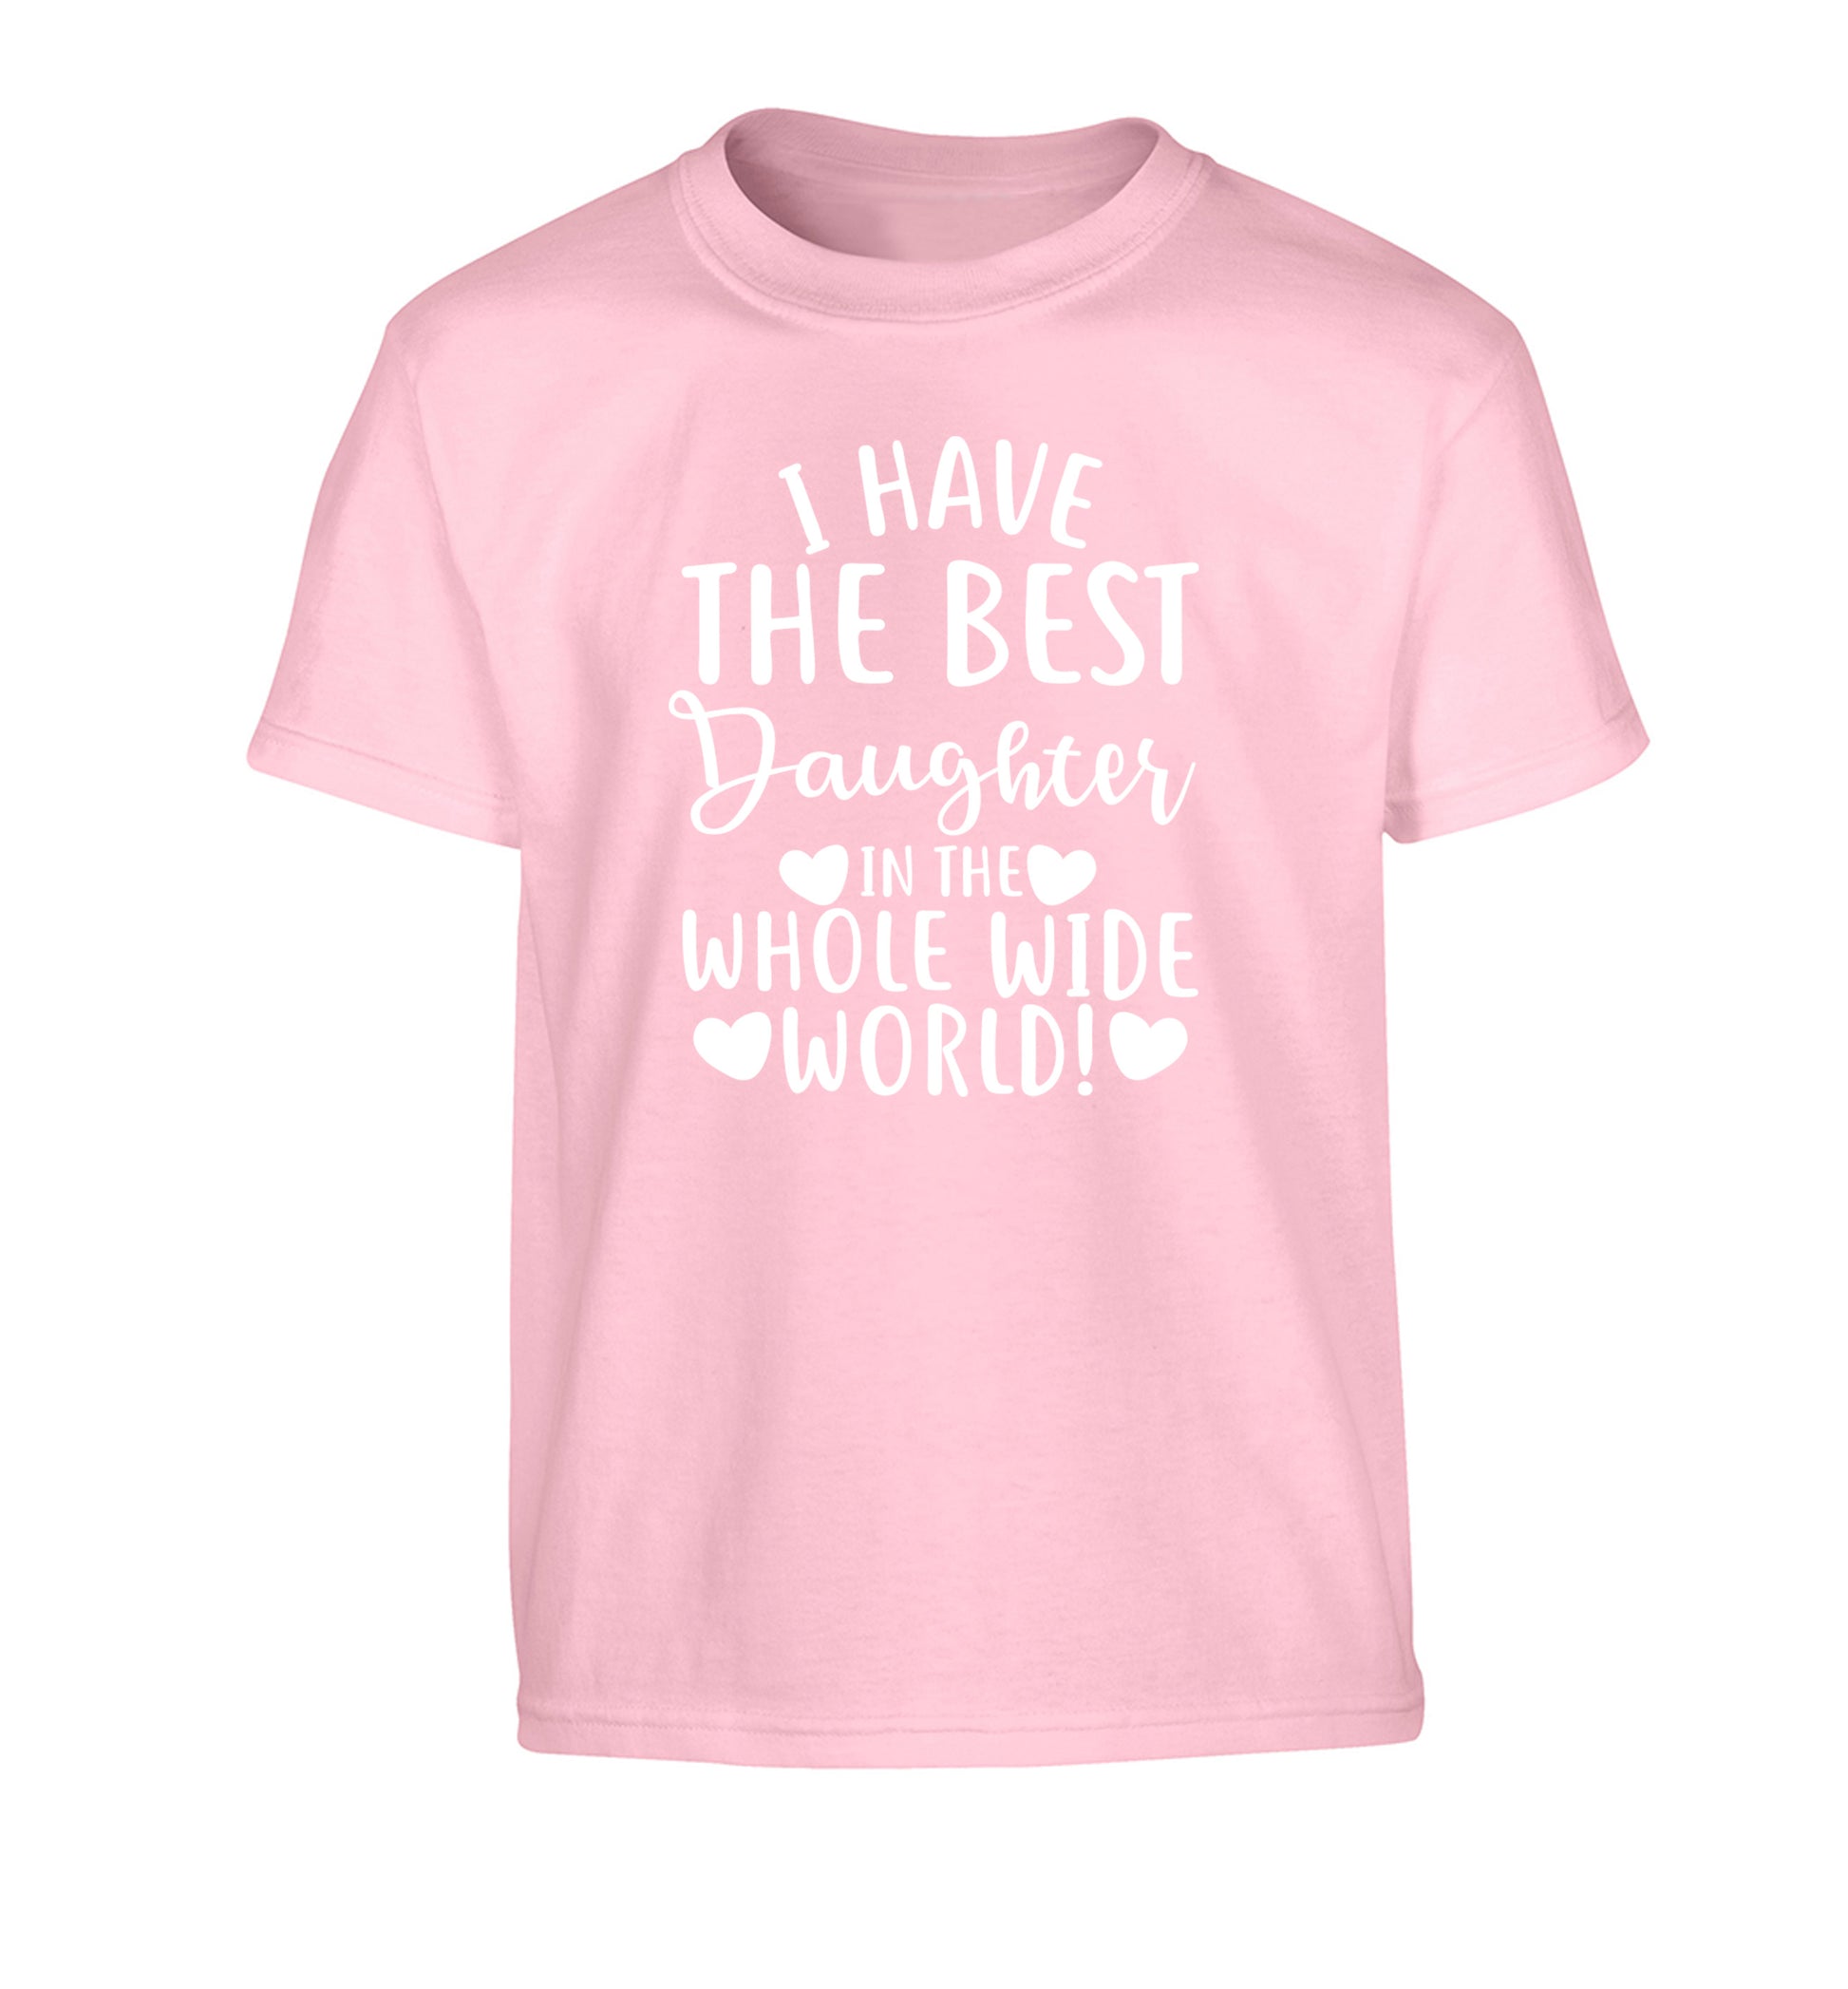 I have the best daughter in the whole wide world! Children's light pink Tshirt 12-13 Years